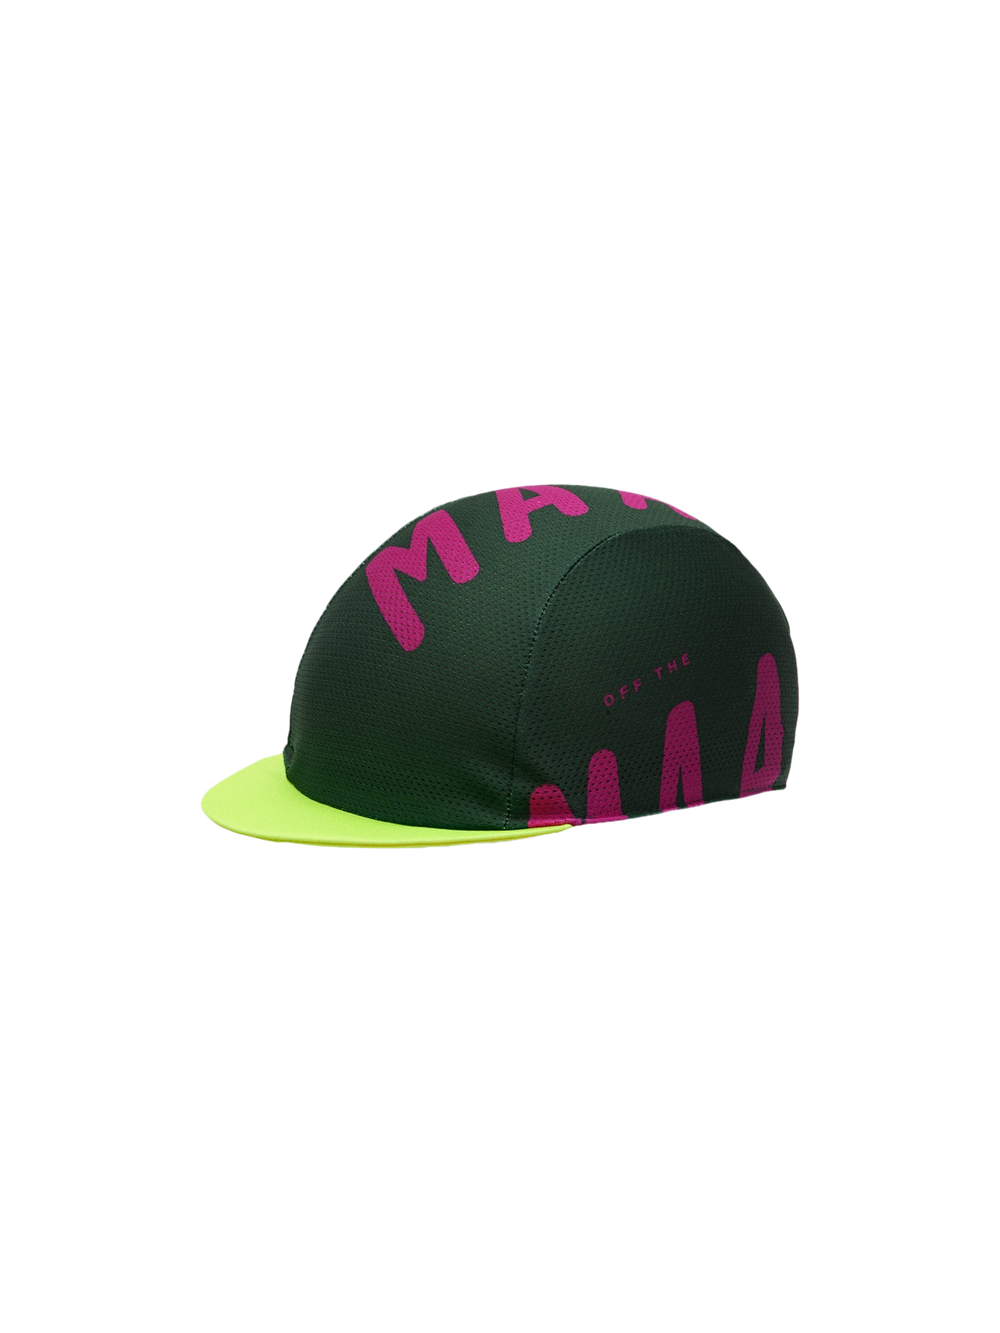 Product Image for MAAP x ZWIFT 2022 Pro Air Cap